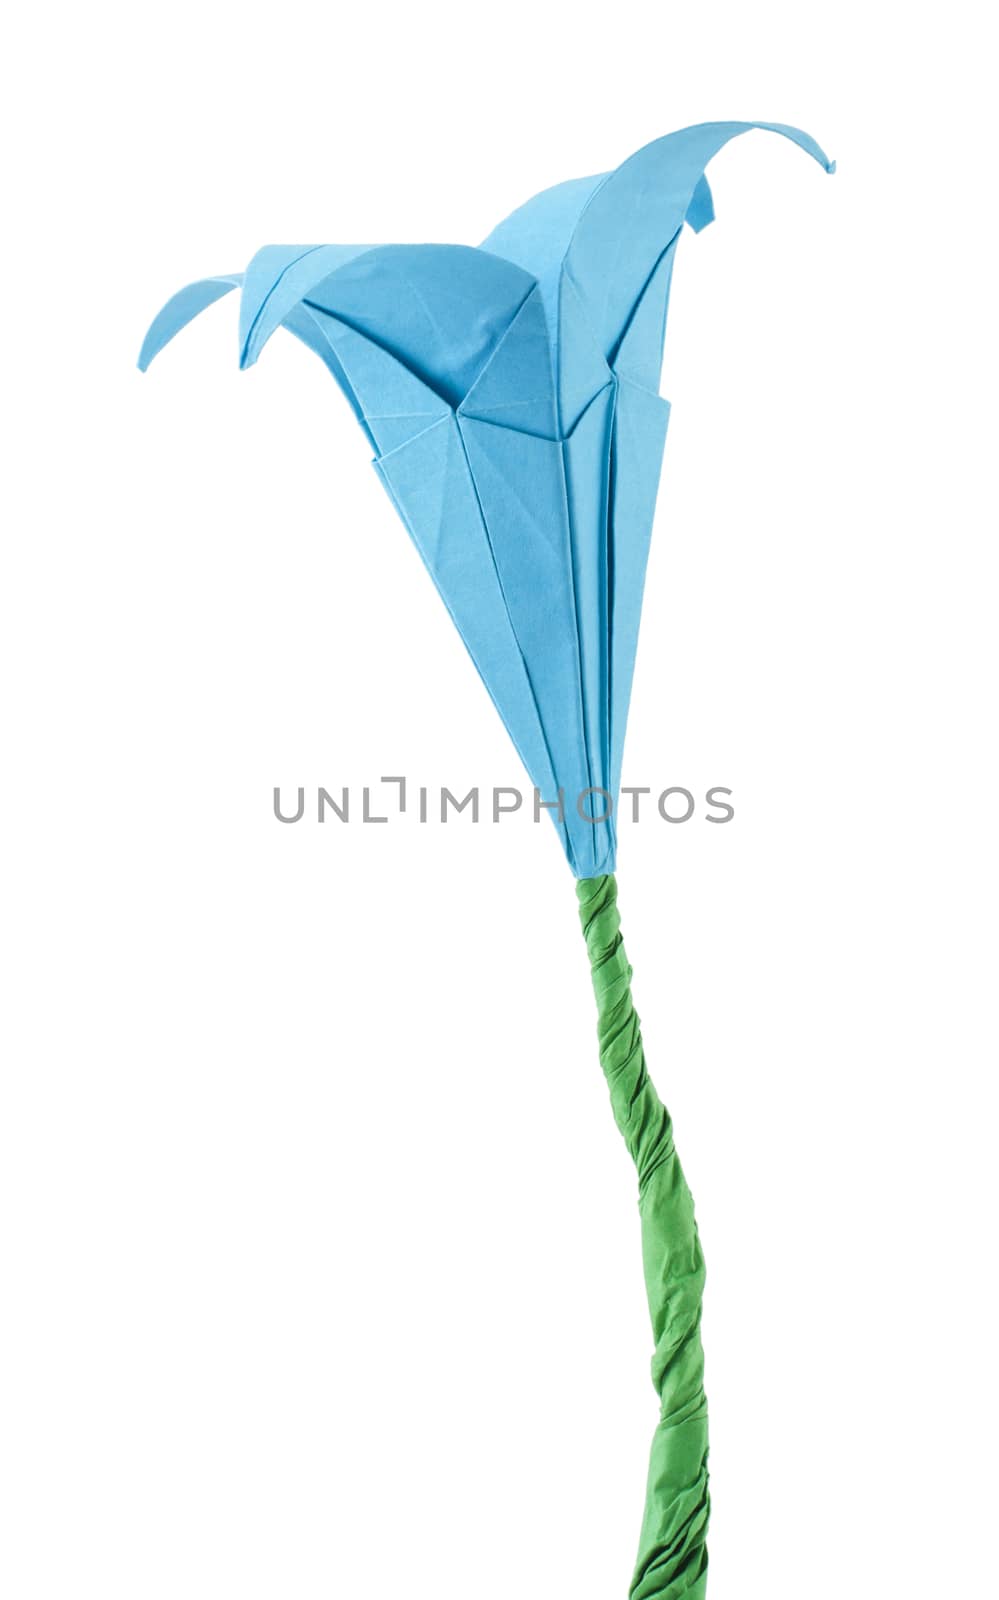 Blue Flower origami white isolated. Paper made flowers.